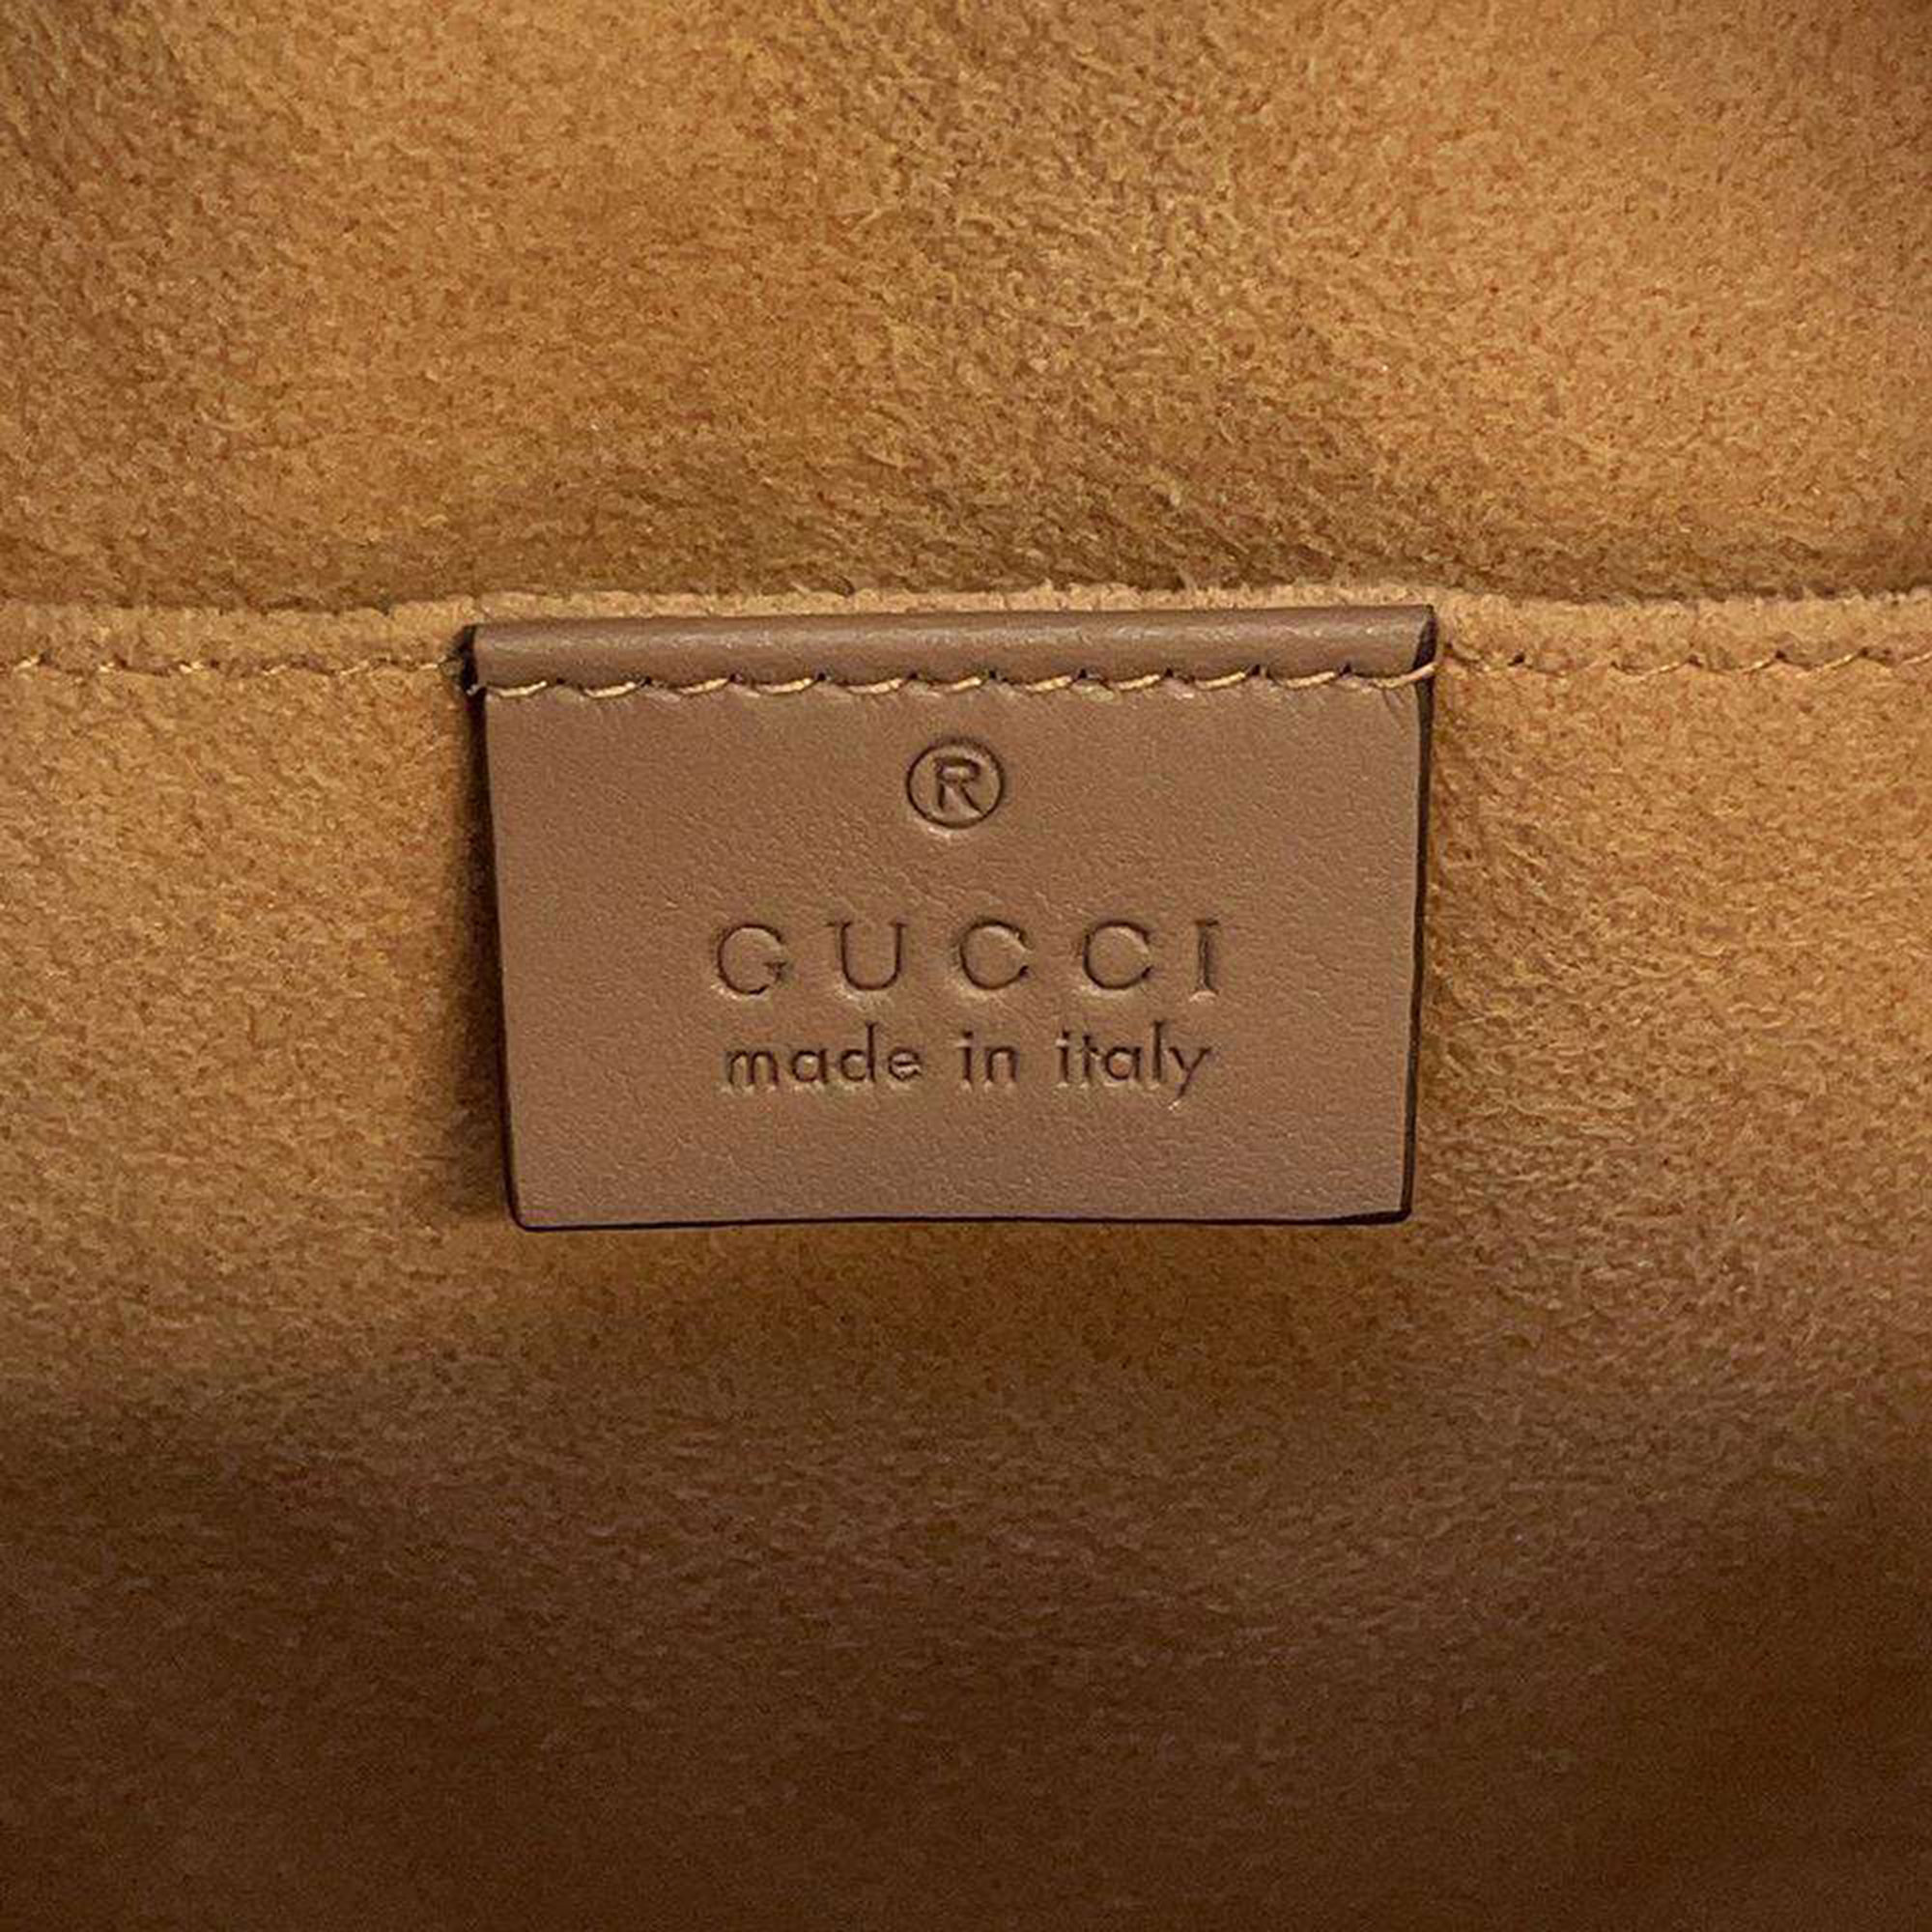 Gucci Beige Leather GG Marmont Backpack